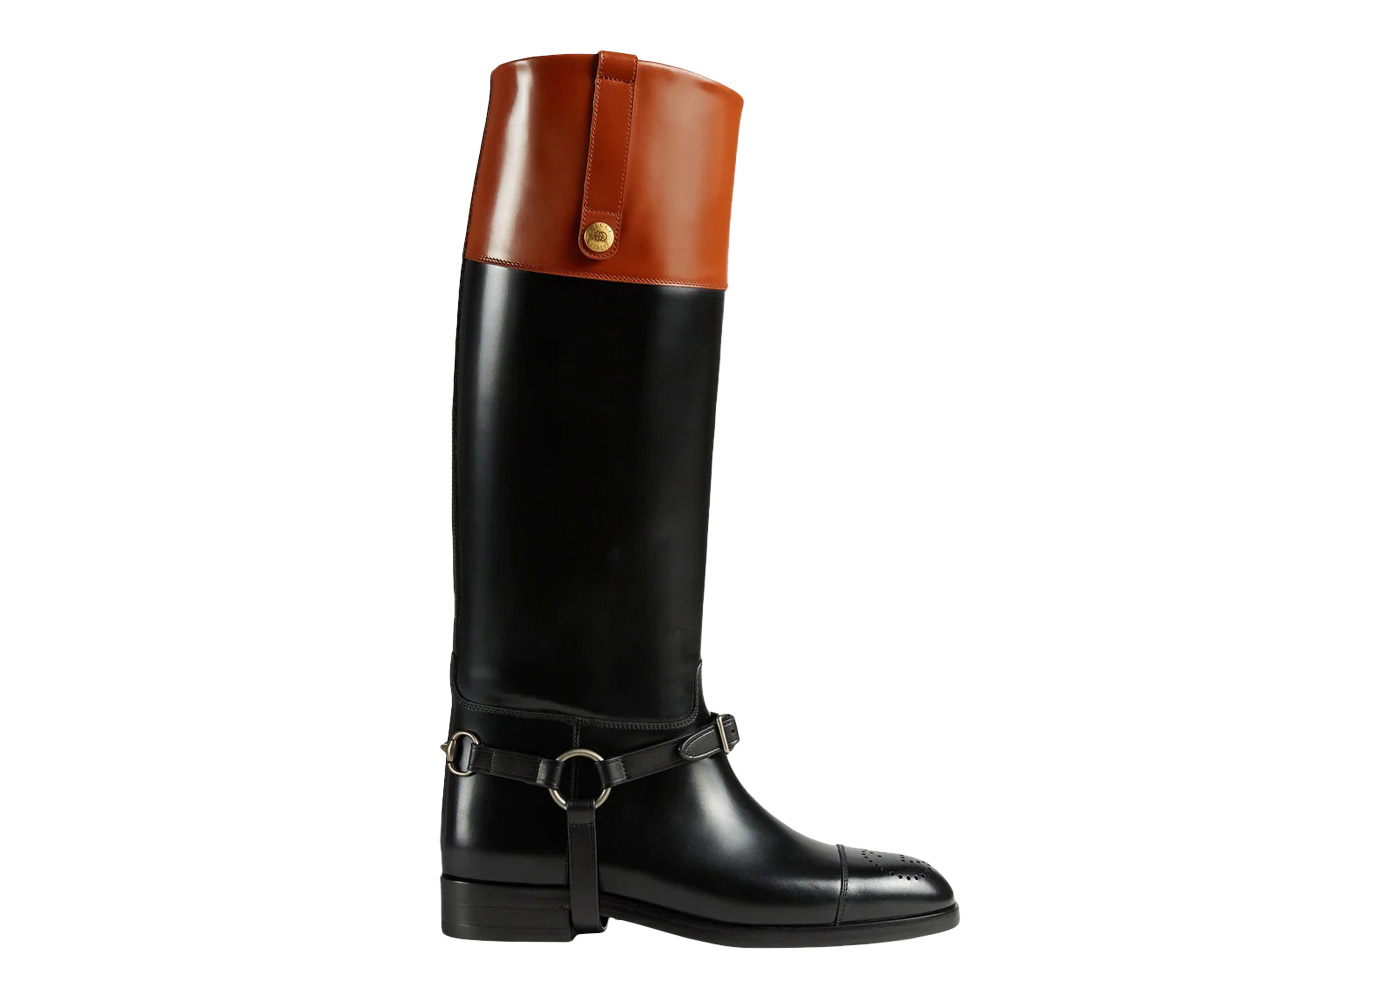 Gucci Knee-High Boot Black Harness Leather - 674670 DS8J0 1079 